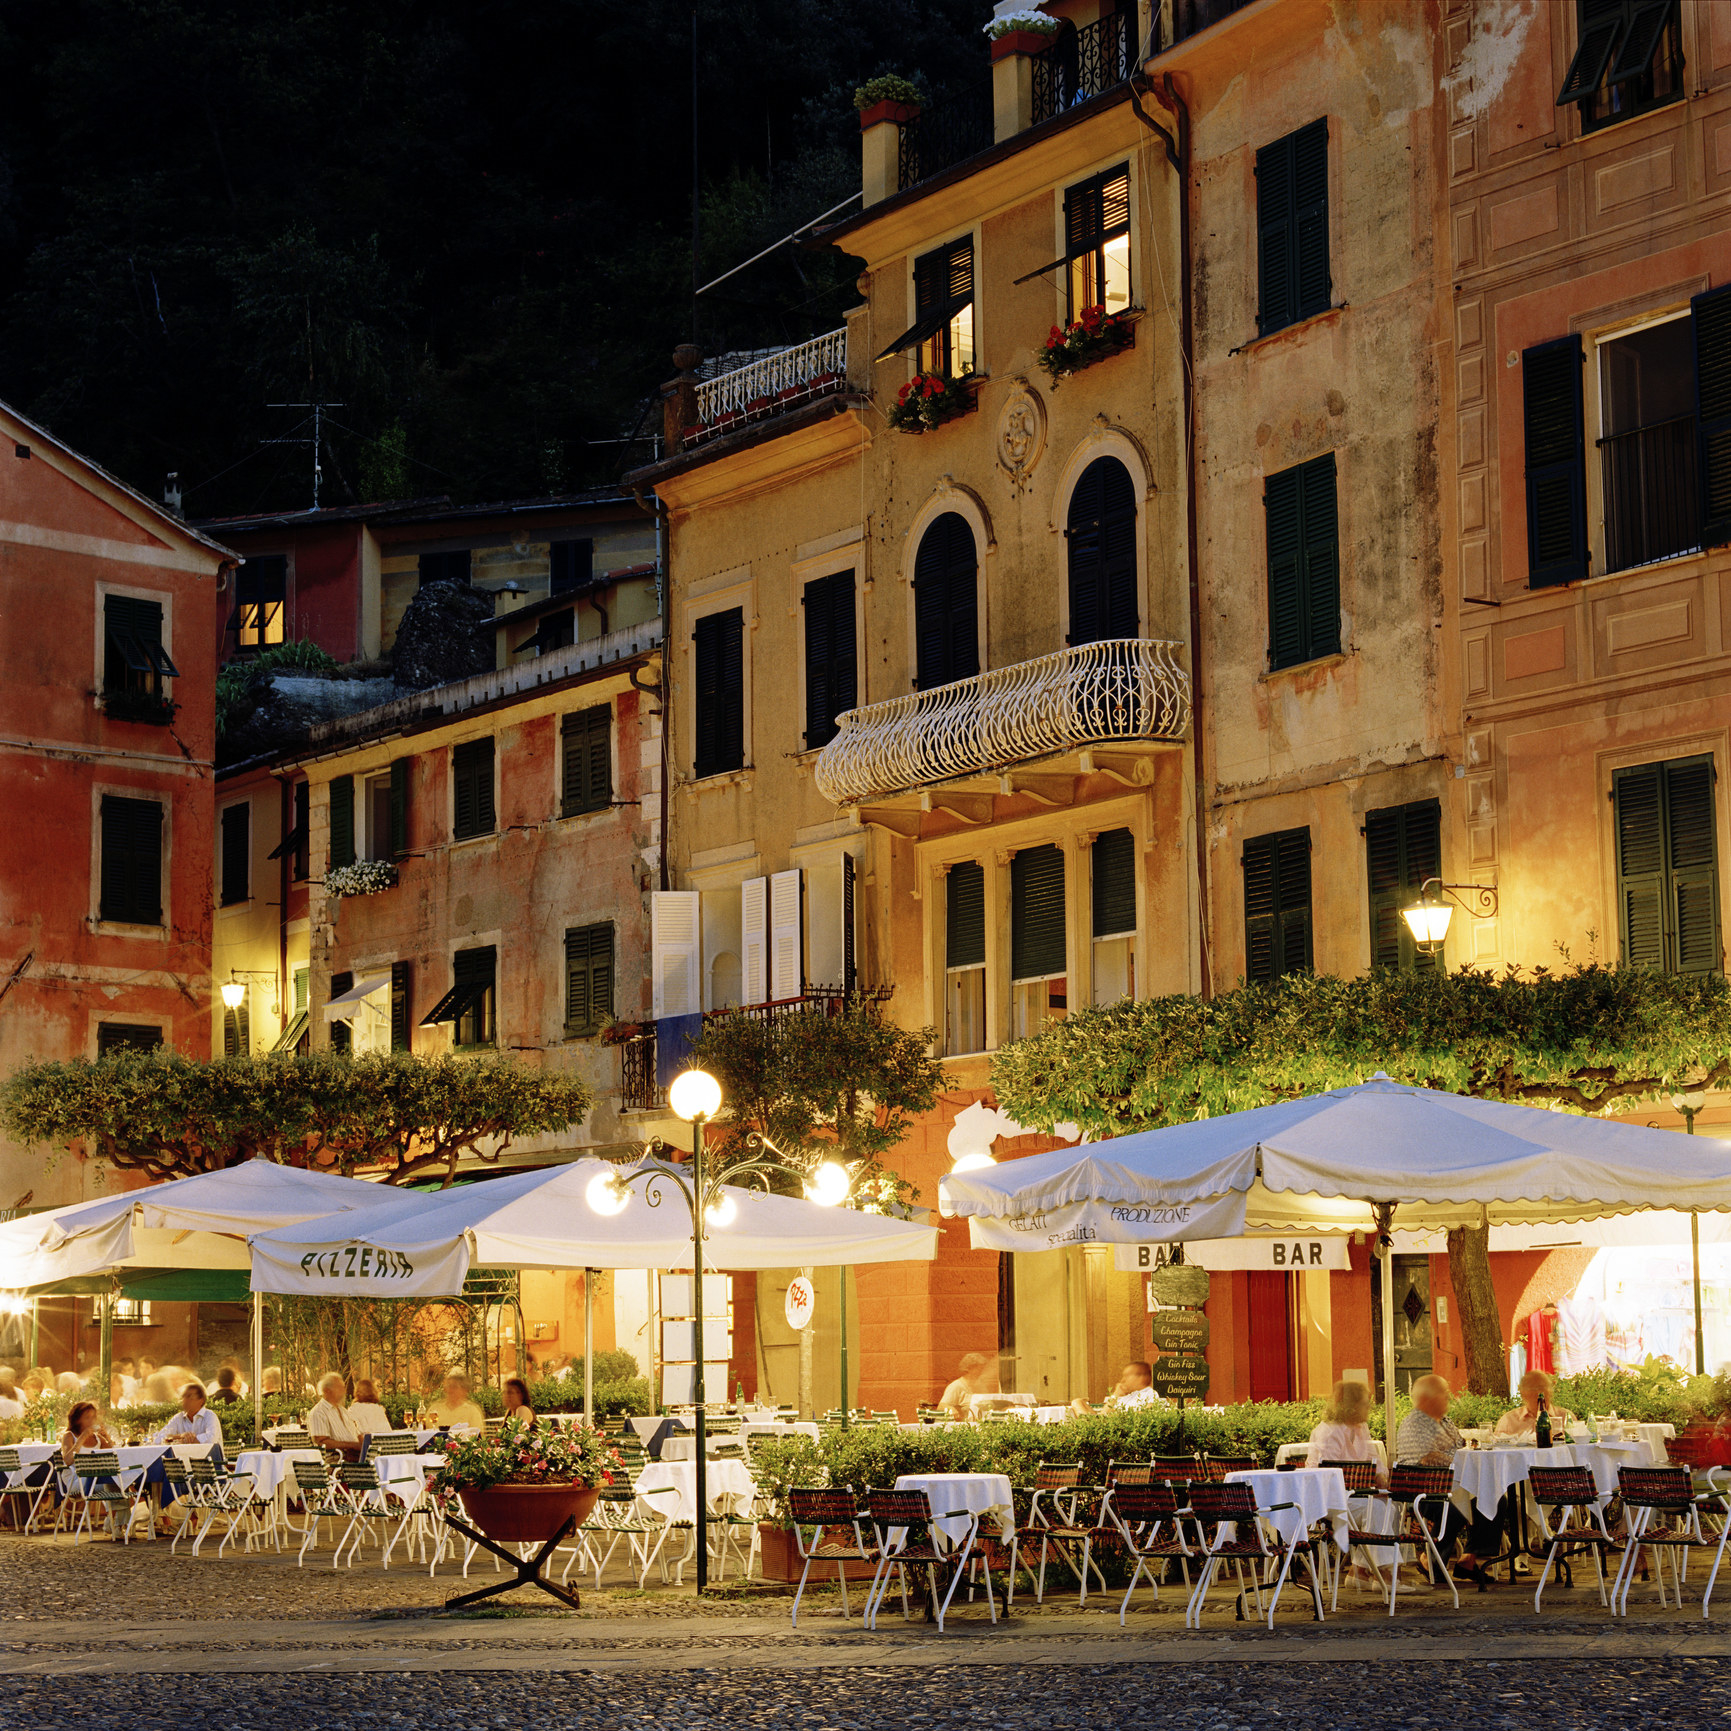 People dining outside in a piazza in Genoa.